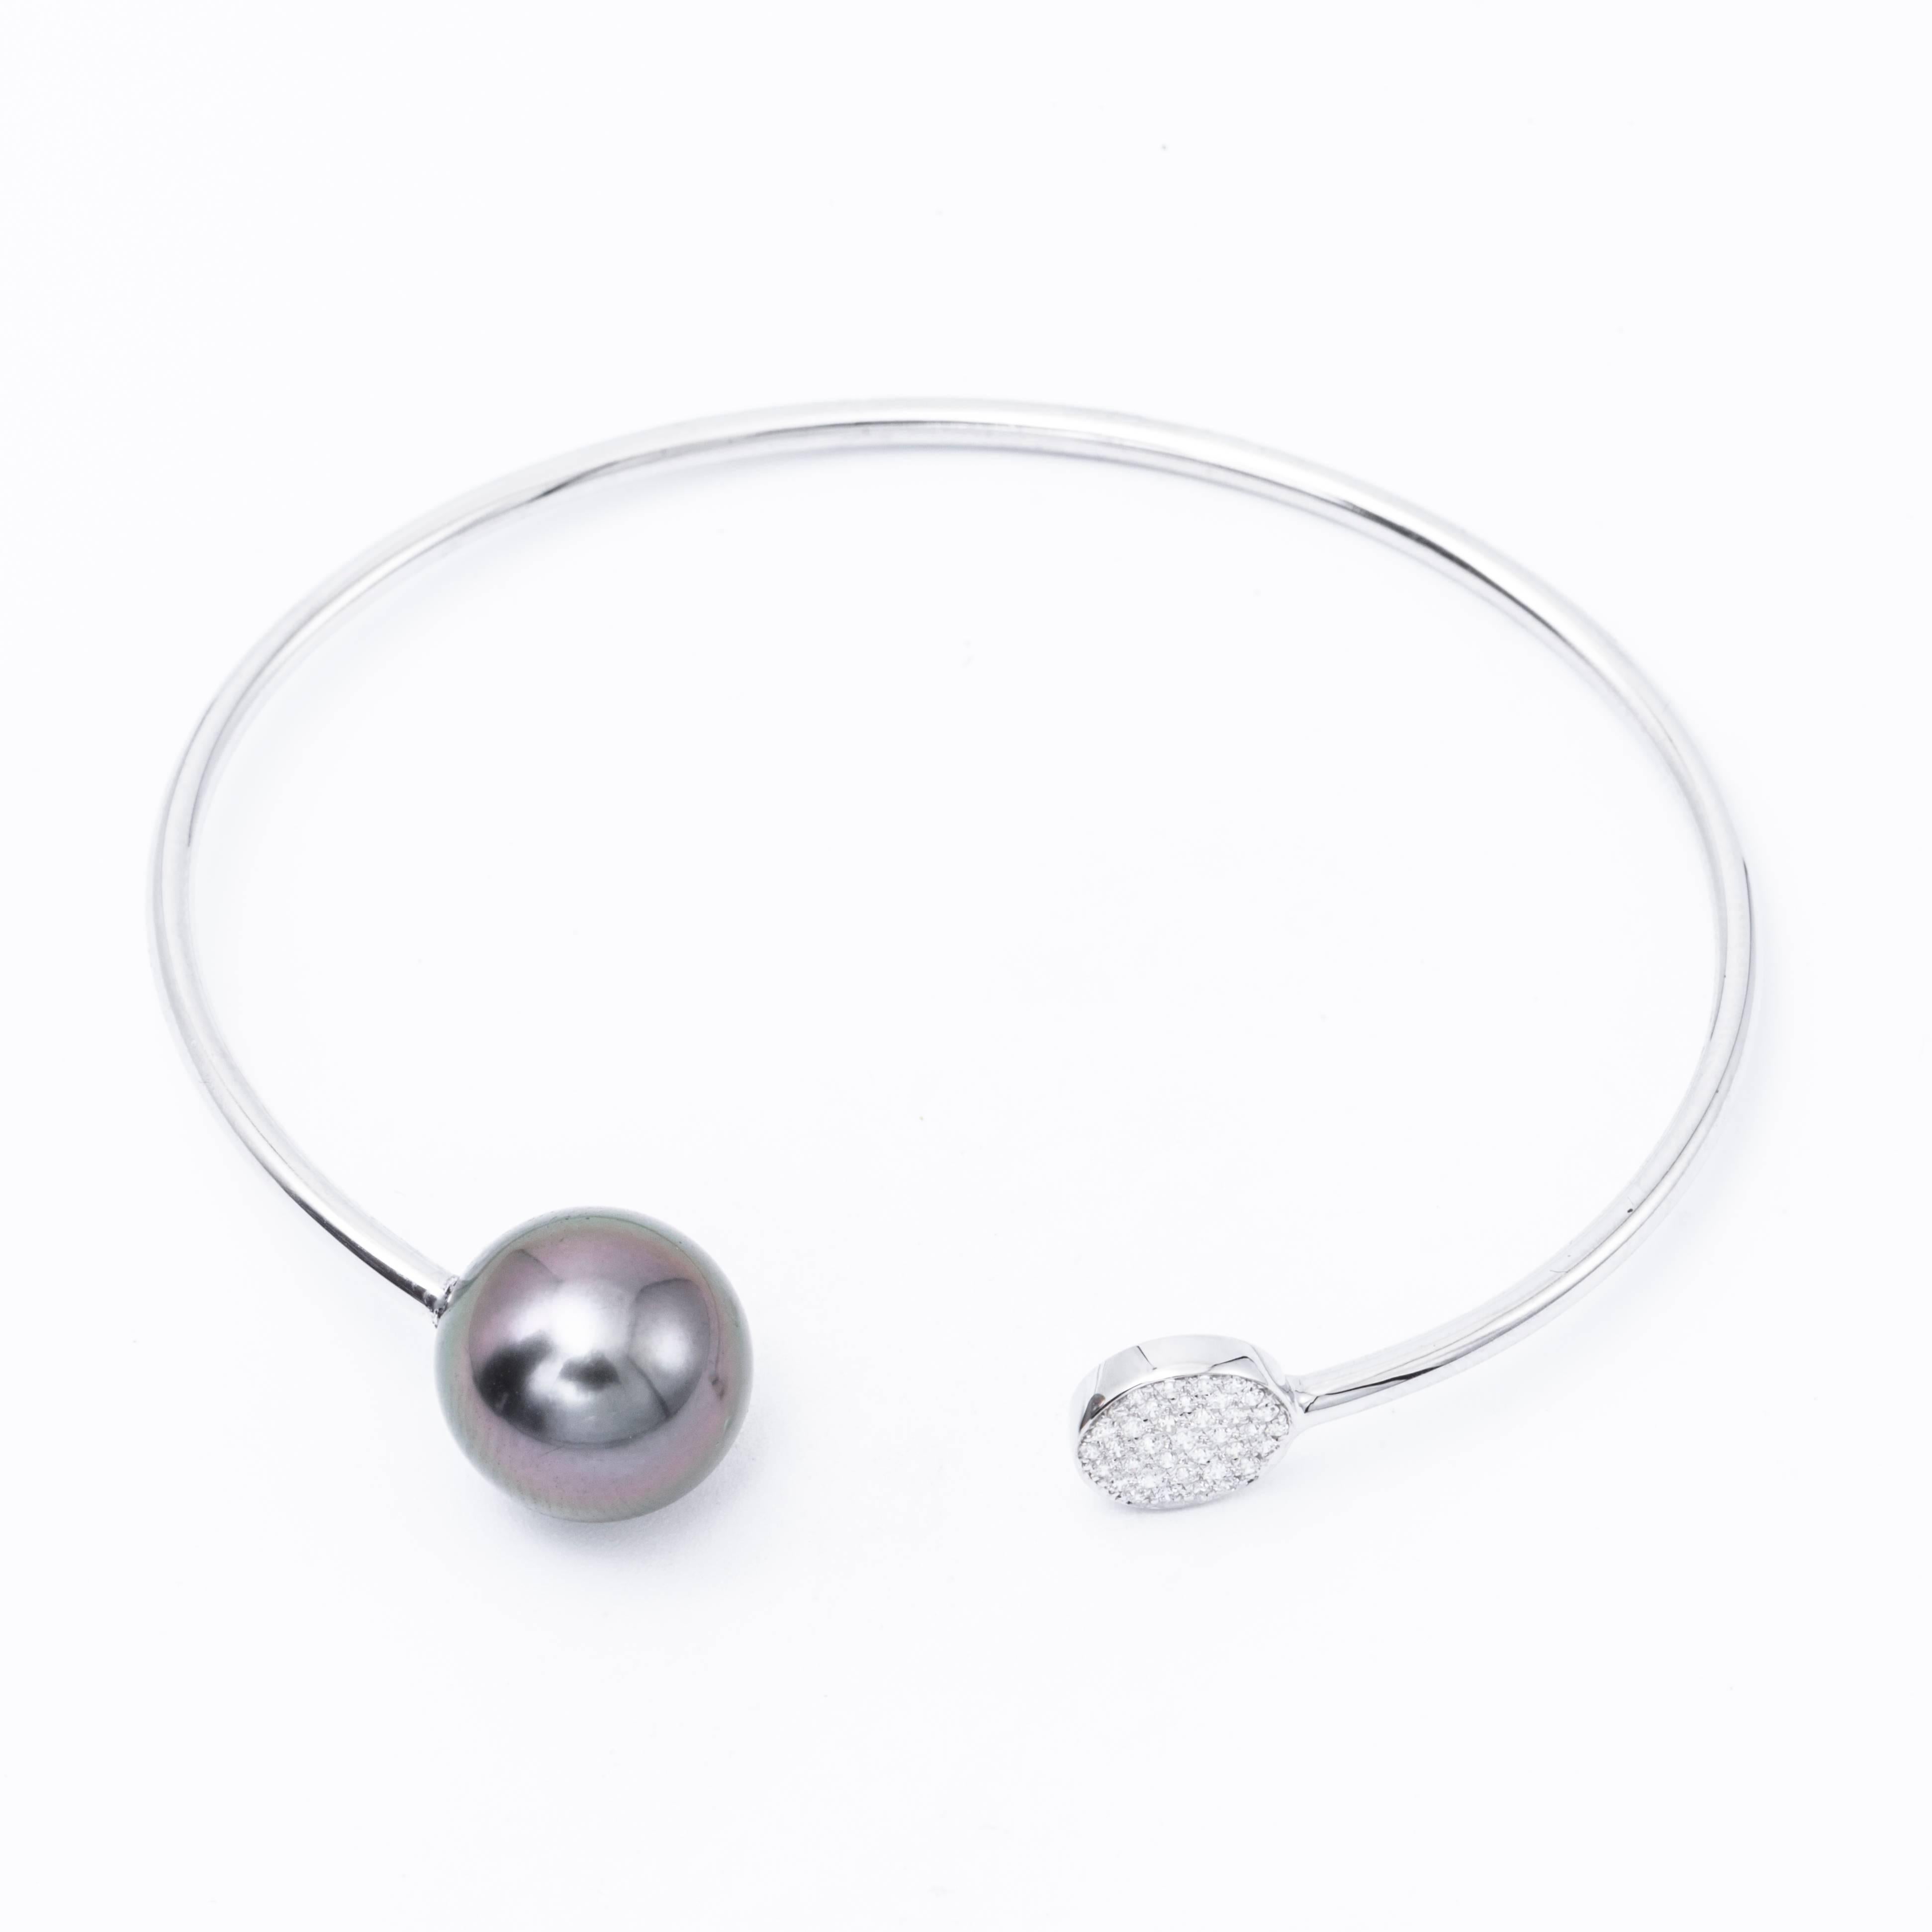 18 Karat white gold bangle bracelet featuring 32 round brilliants weighing 0.12 carats and one grey Tahitian Cultured Pearl measuring 11-12 mm.
Color G-H
Clarity SI